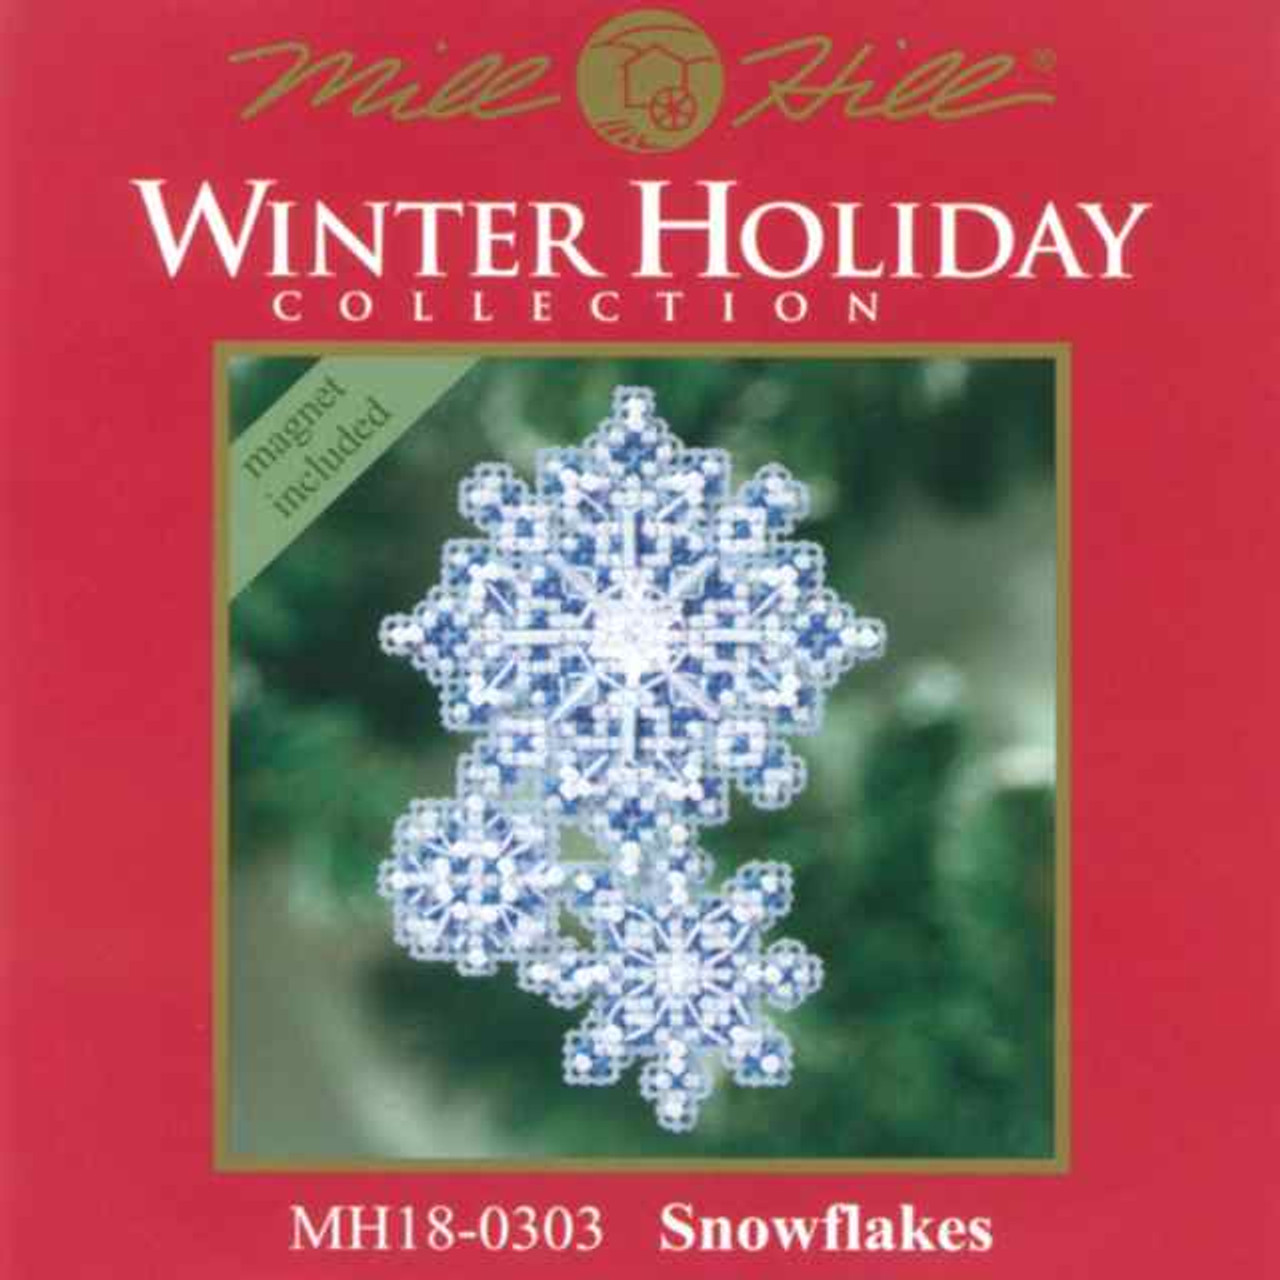 Snowflakes Bead Christmas Ornament Kit Mill Hill 2010 Winter Holiday